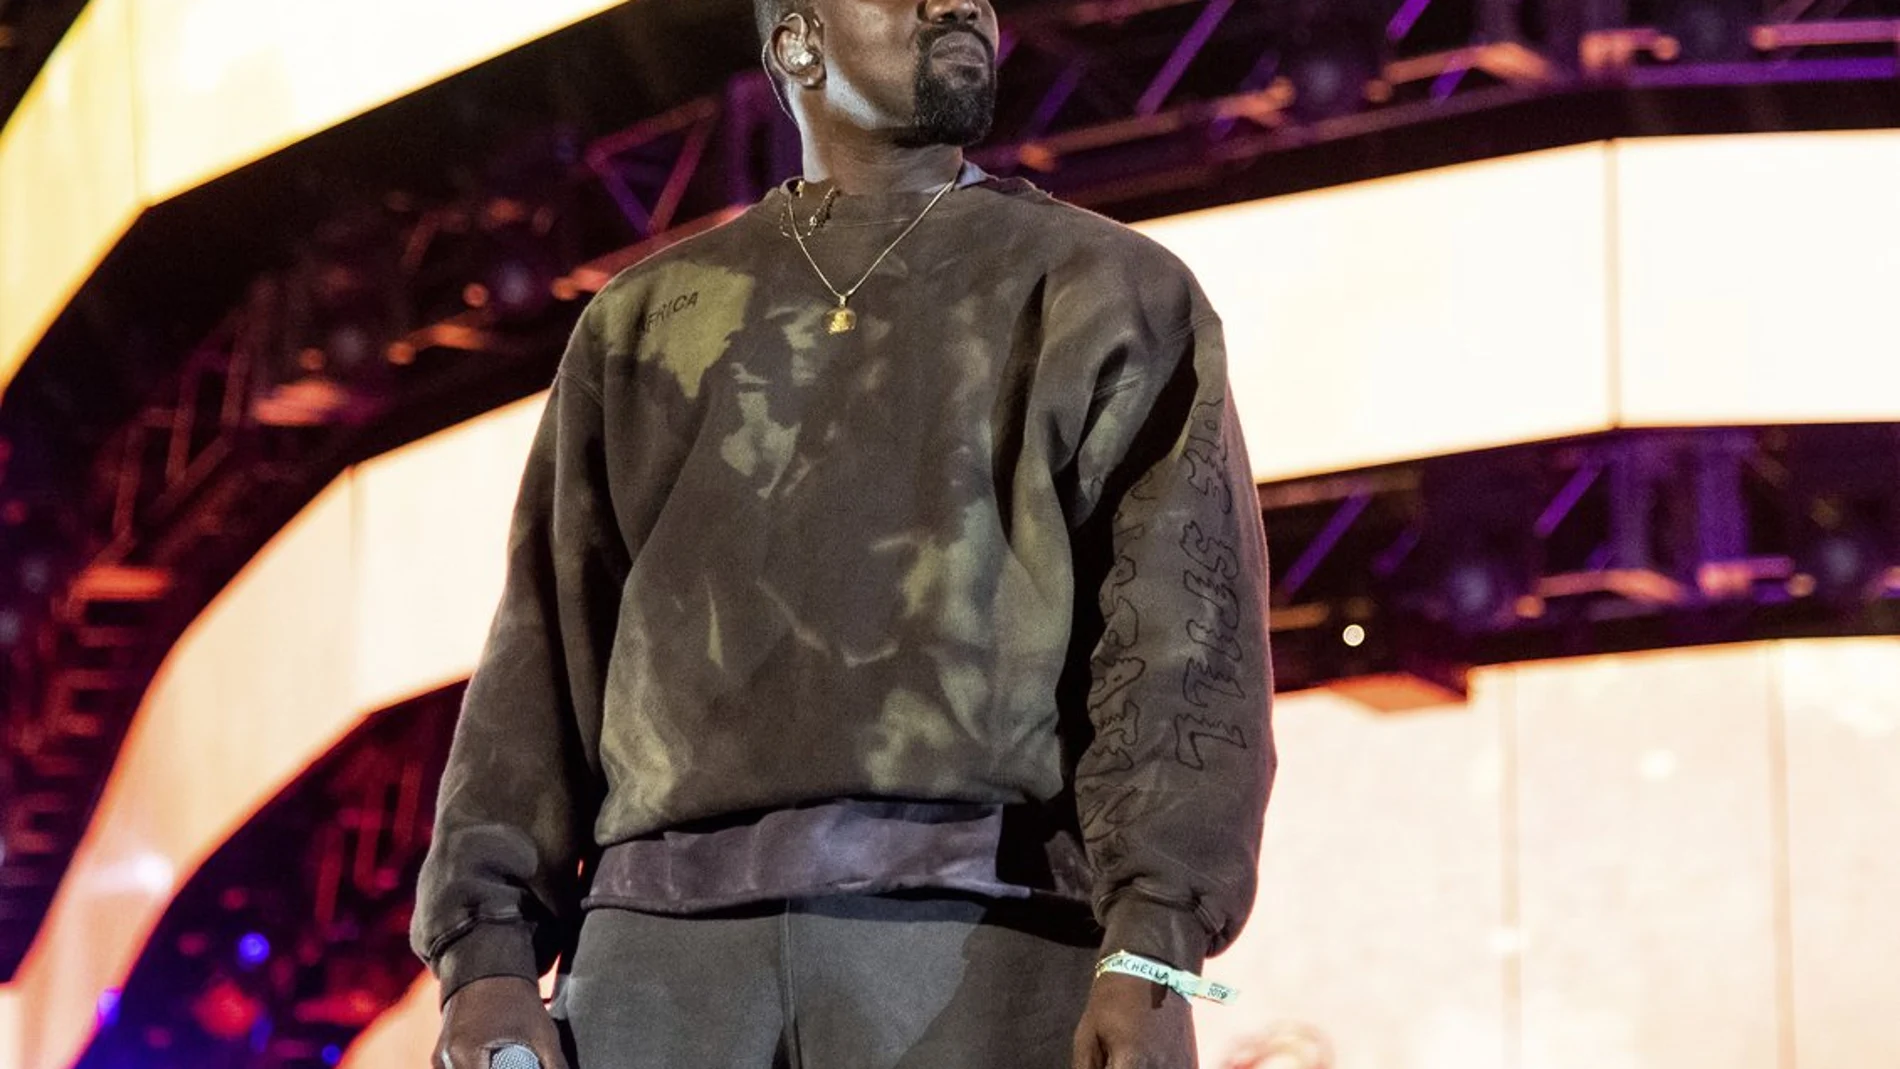 File photo shows Kanye West performing at the Coachella Music & Arts Festival in Indio, Calif.